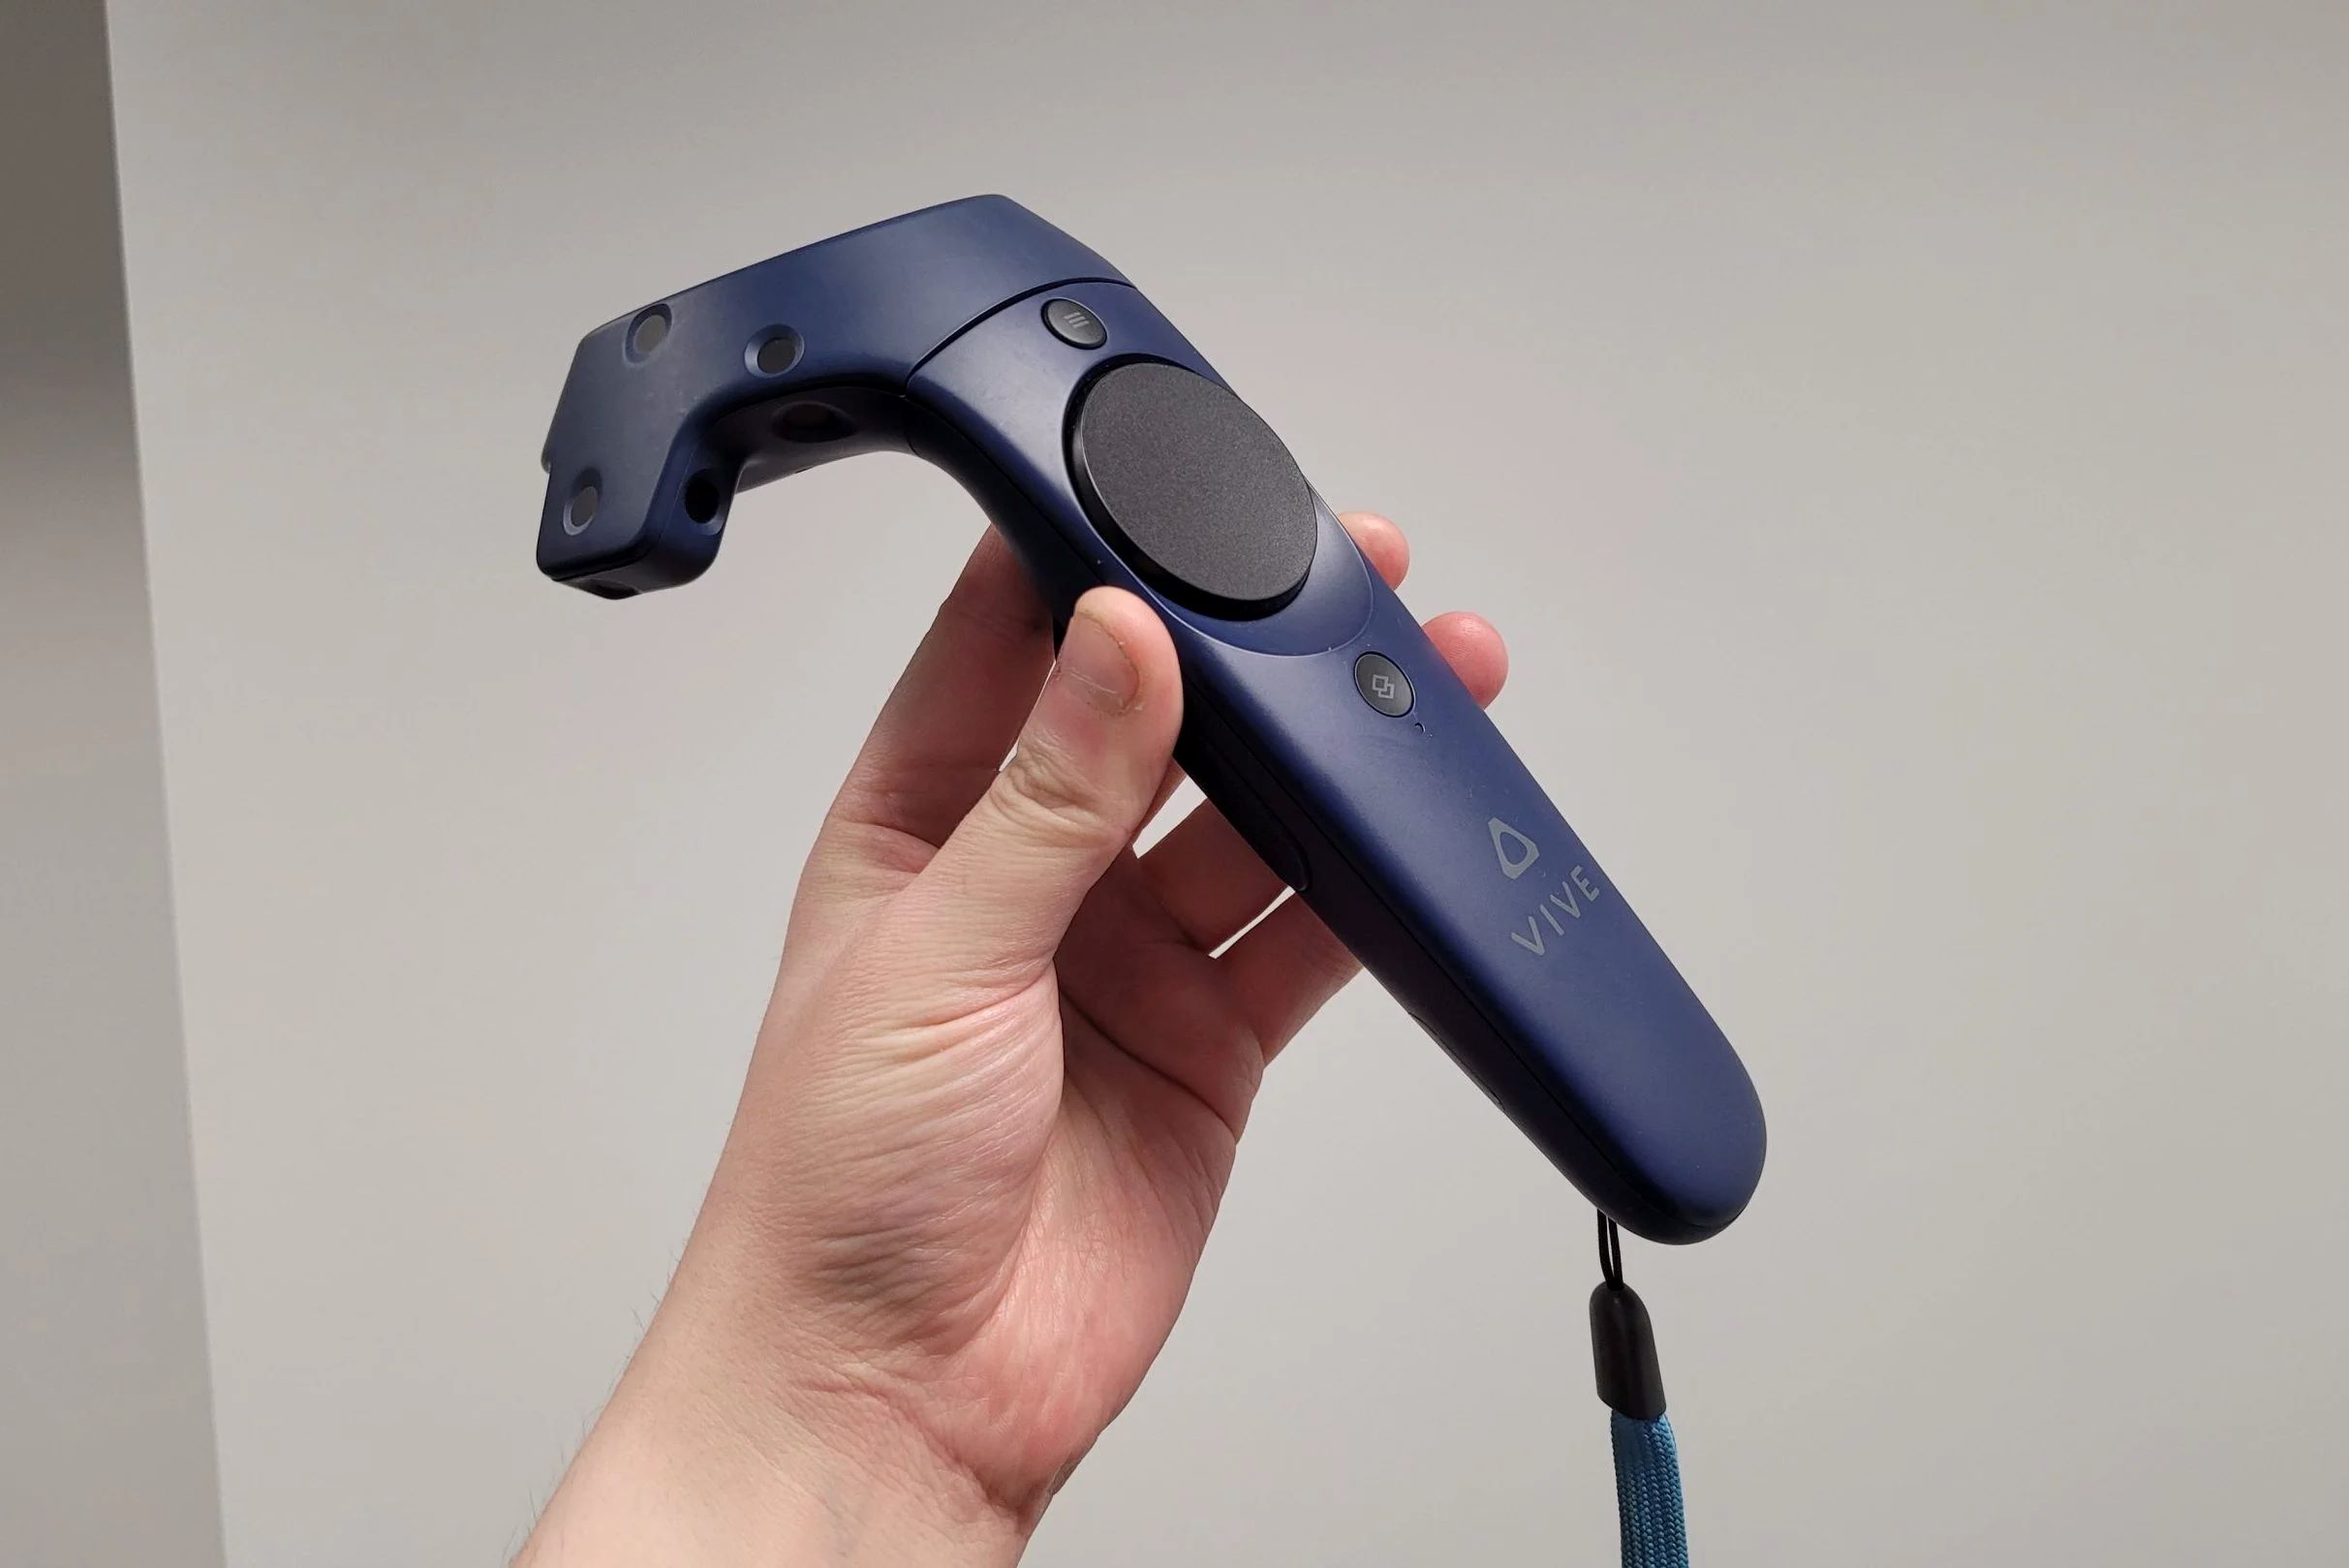 What Does The Red Light Mean On The HTC Vive Controllers